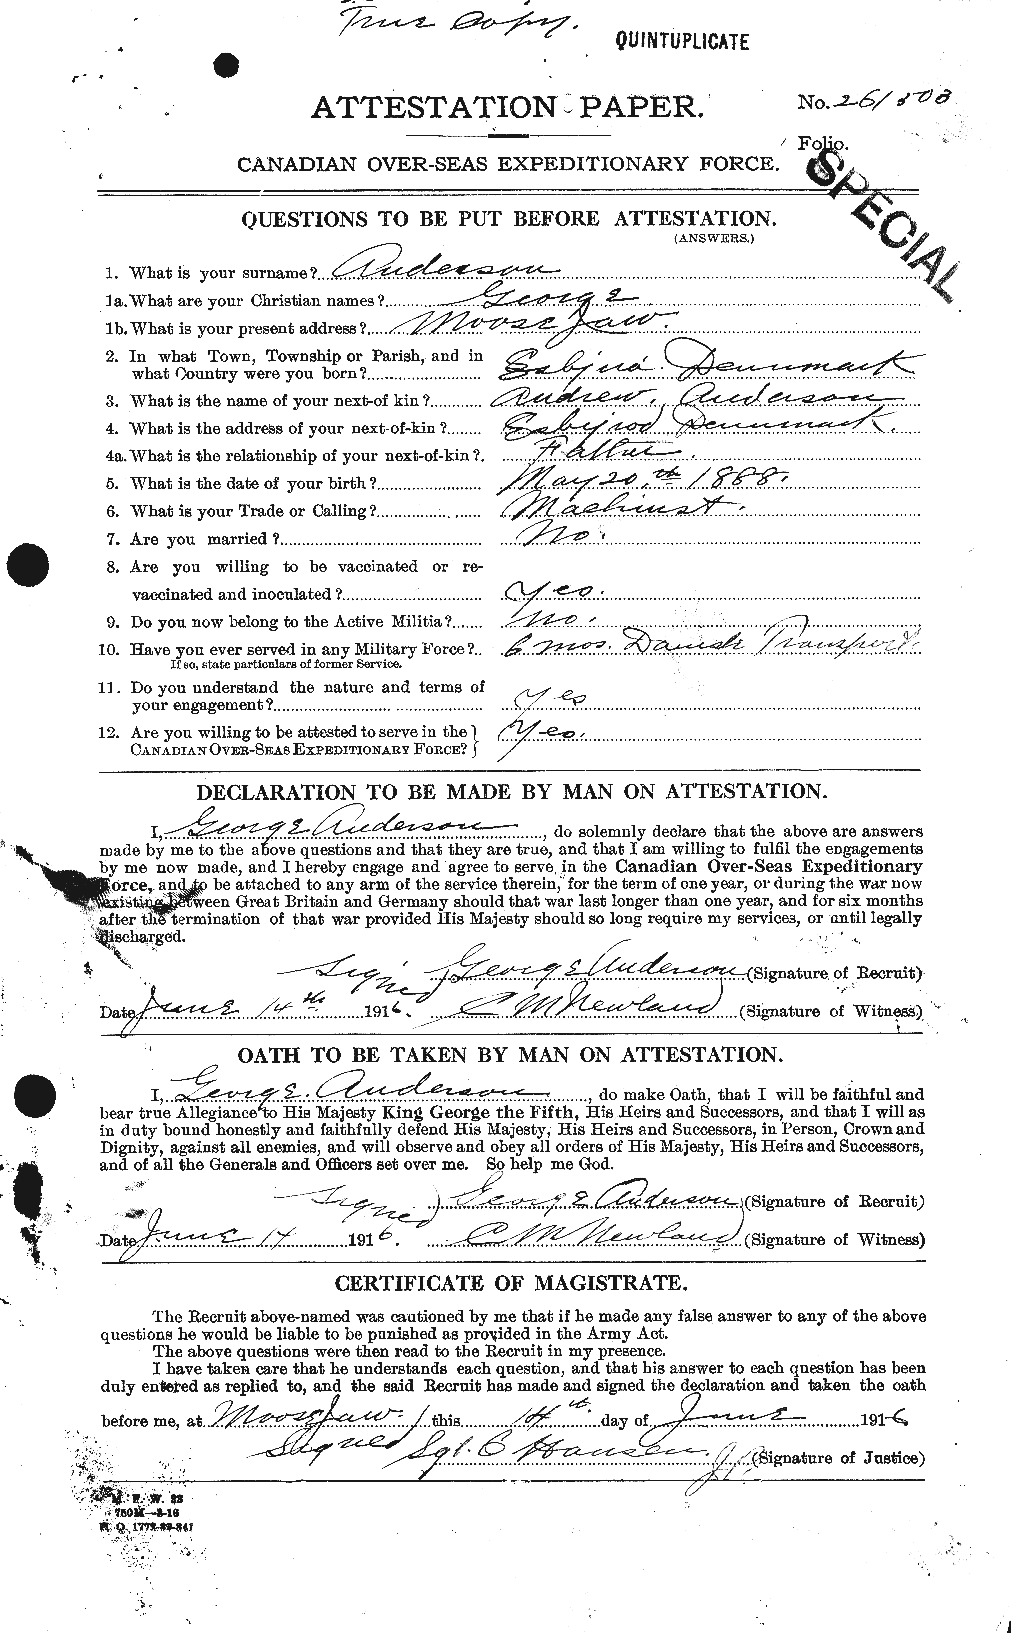 Personnel Records of the First World War - CEF 209733a